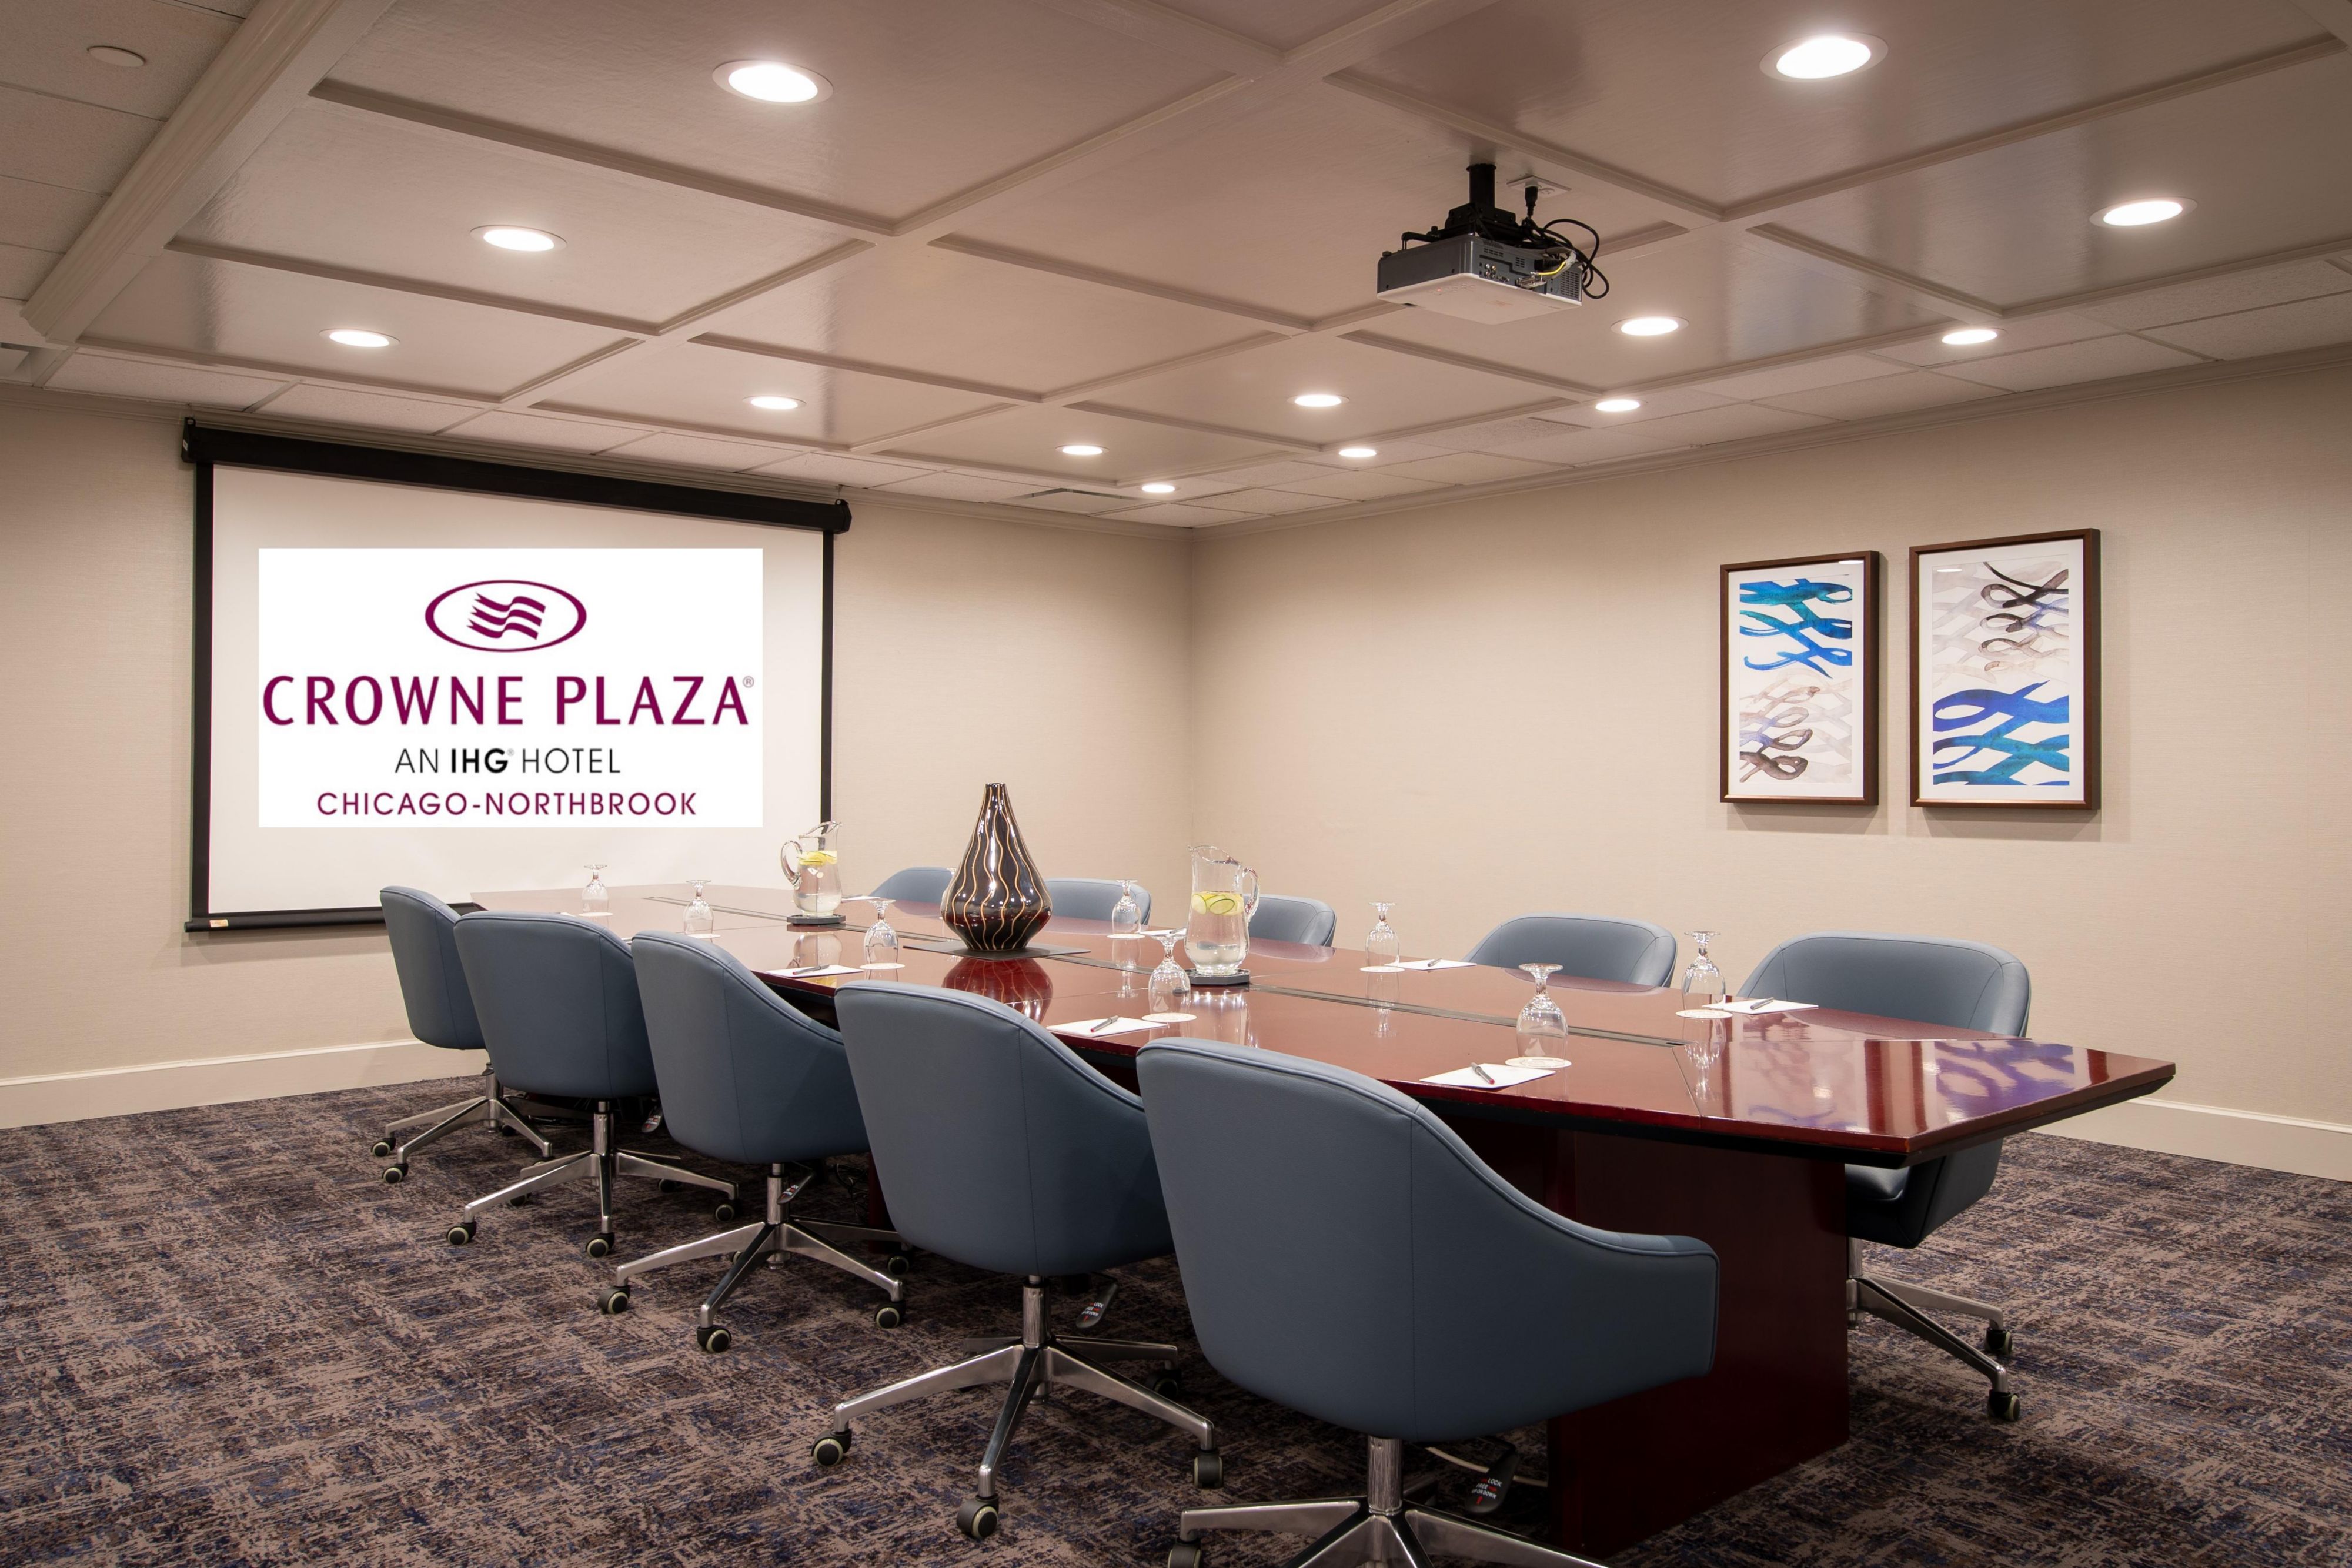 Plan your next meeting in our newly renovated Illinois Board Room